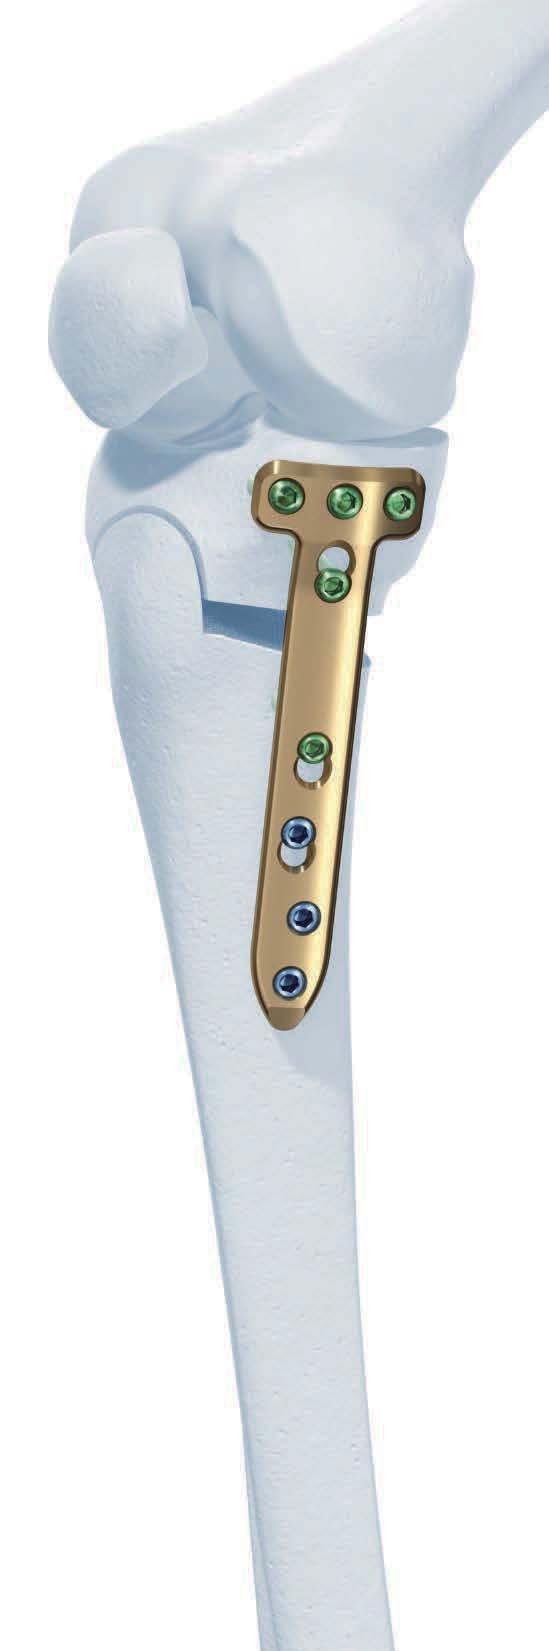 TomoFix Osteotomy System. A comprehensive plating system for stable fixation of osteotomies around the knee.